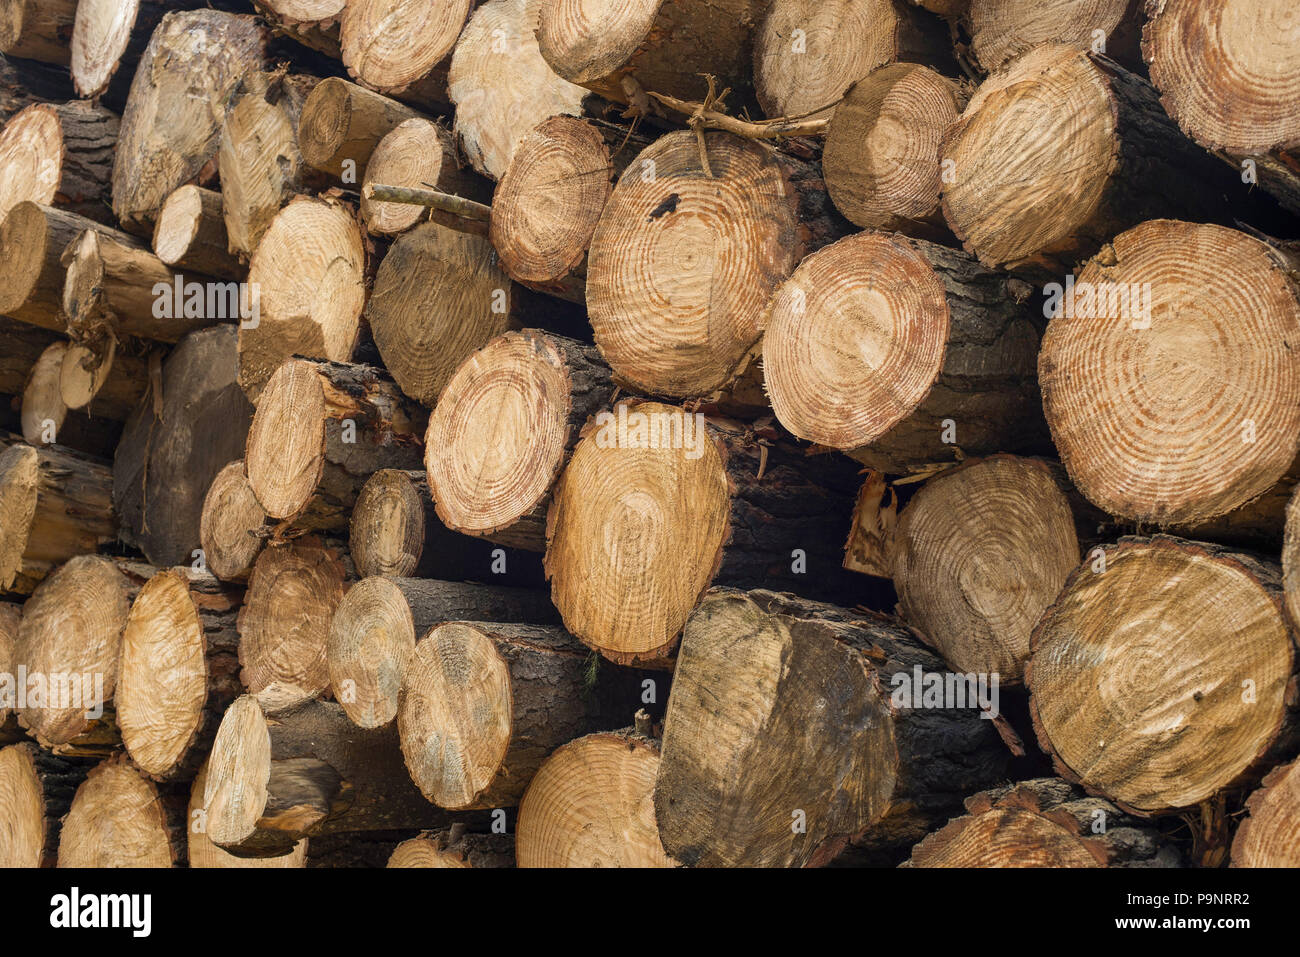 Wood log pile, timber stack texture background. Wooden tree trunks cut for lumber industry. Stock Photo